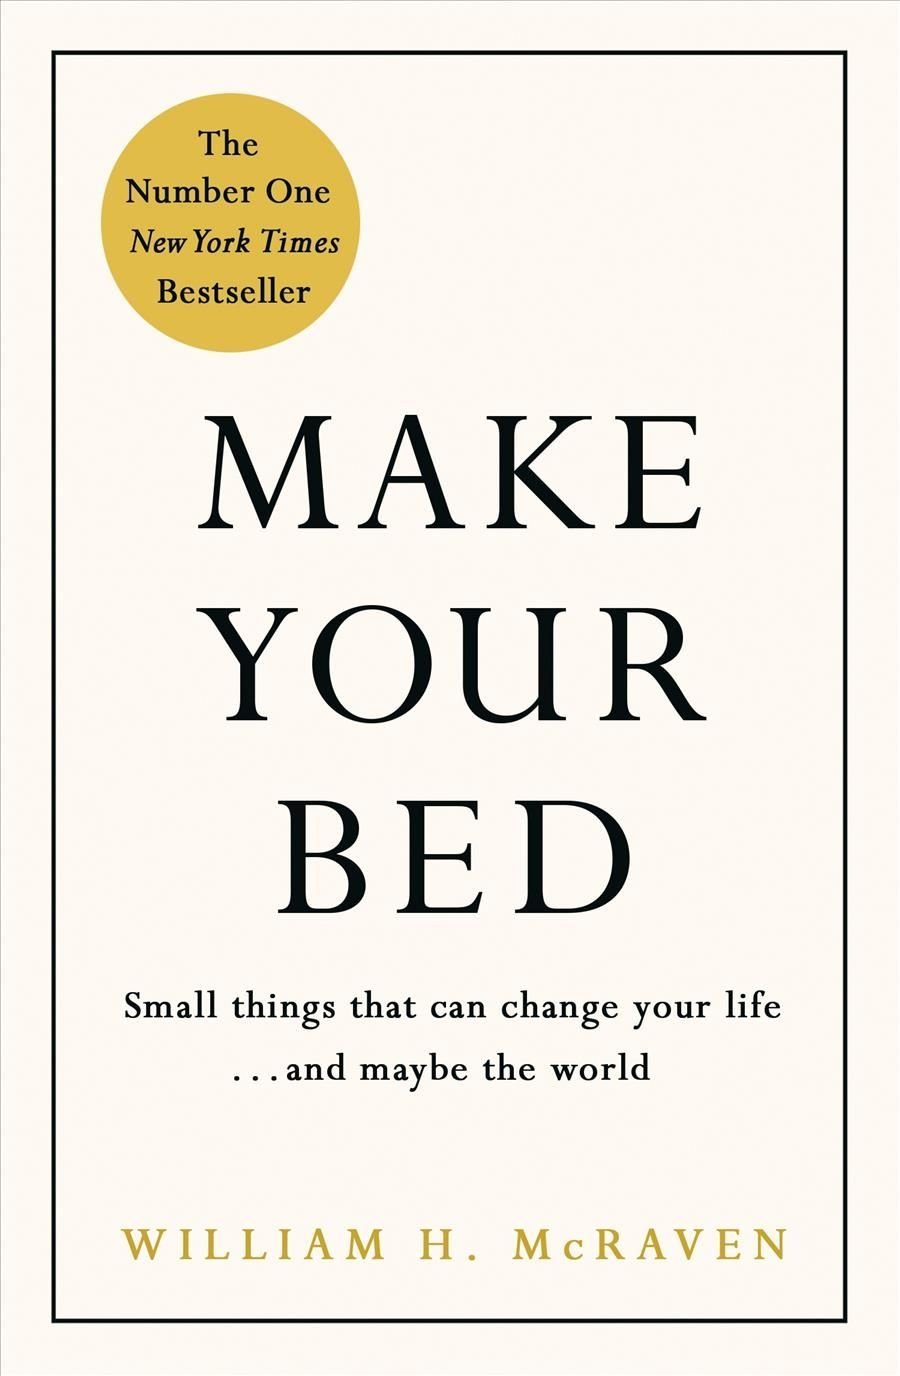 admiral william mcraven make your bed